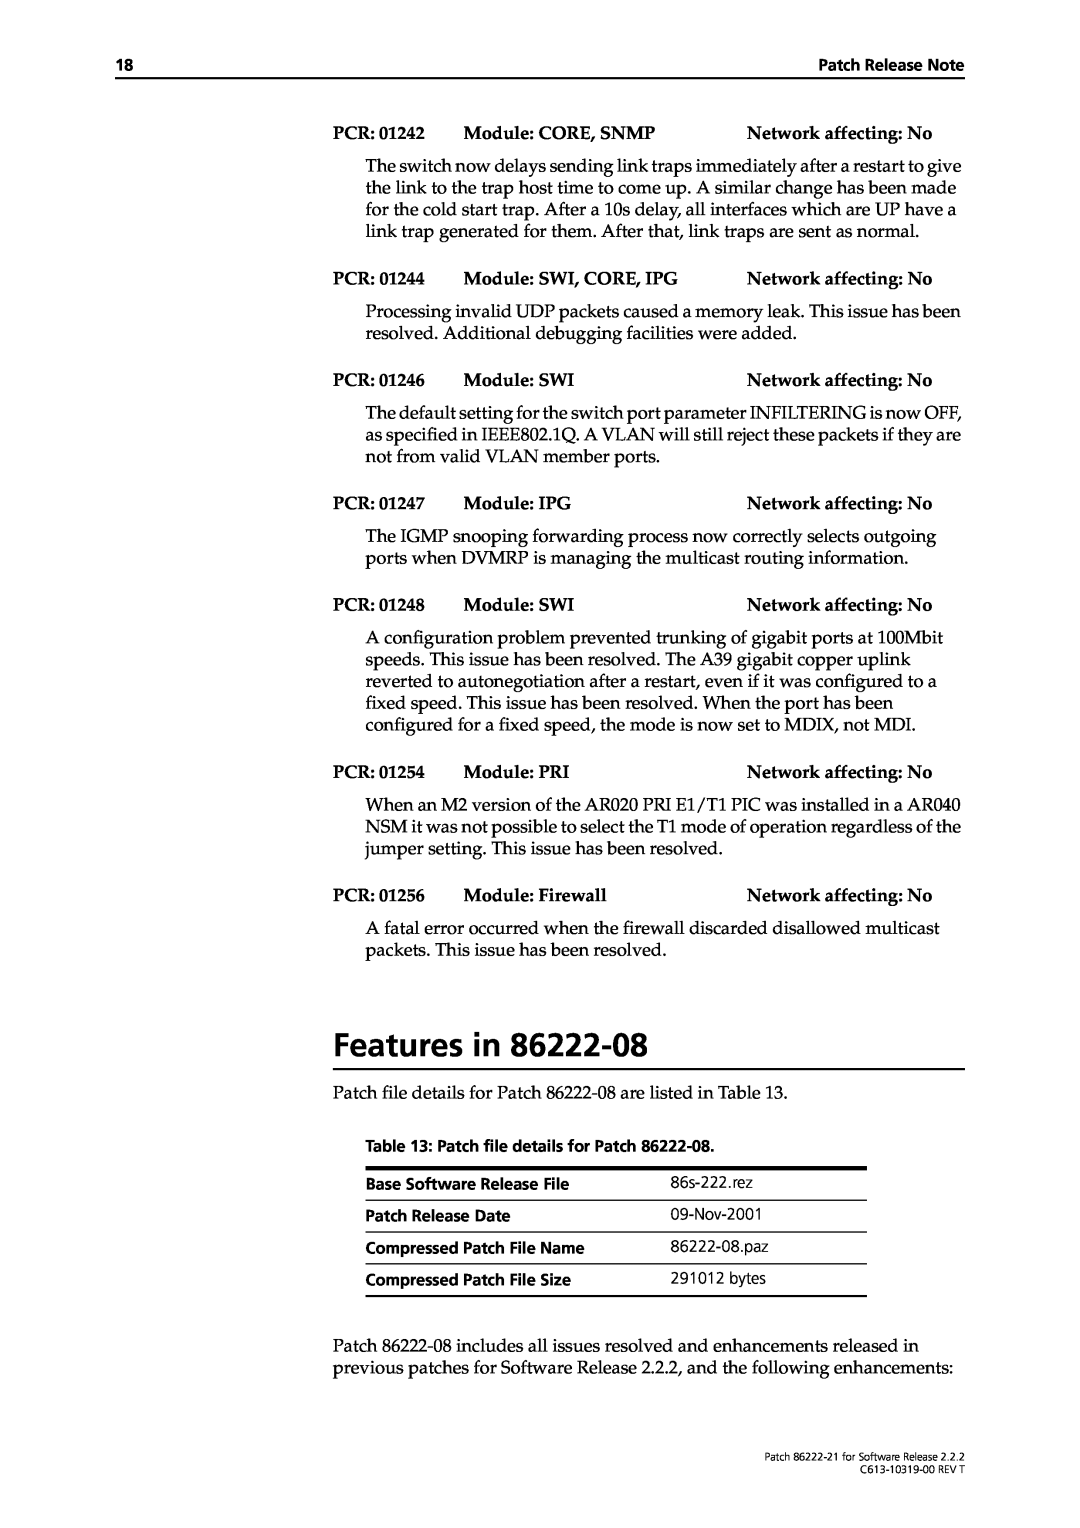 Allied Telesis 86222-21 manual Features in, Patch file details for Patch 86222-08 are listed in Table 